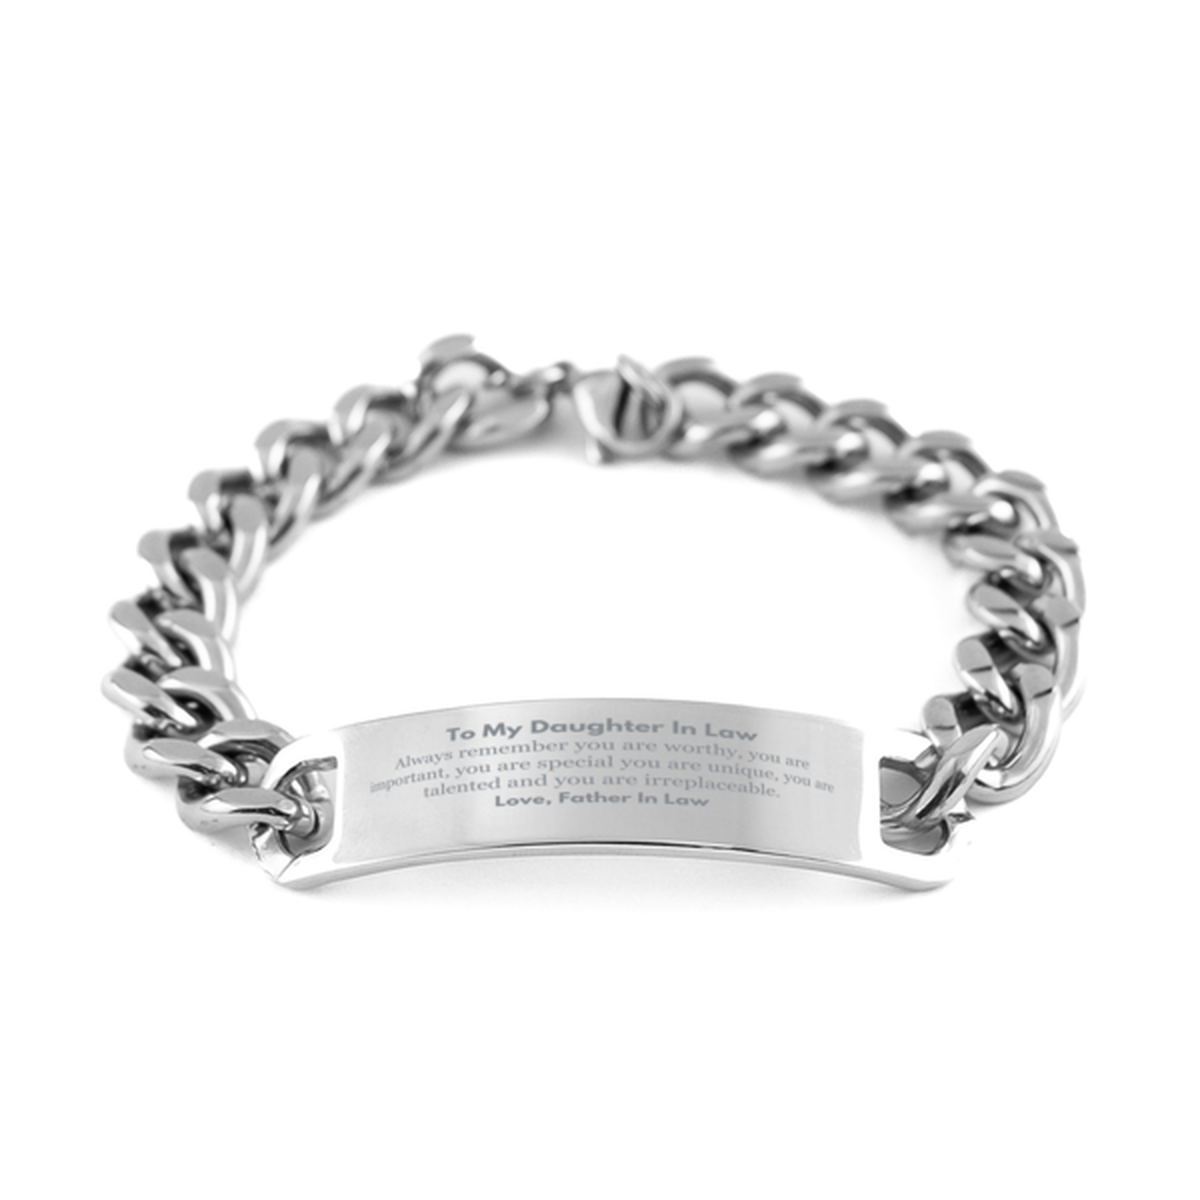 Daughter In Law Birthday Gifts from Father In Law, Inspirational Cuban Chain Stainless Steel Bracelet for Daughter In Law Christmas Graduation Gifts for Daughter In Law Always remember you are worthy, you are important. Love, Father In Law